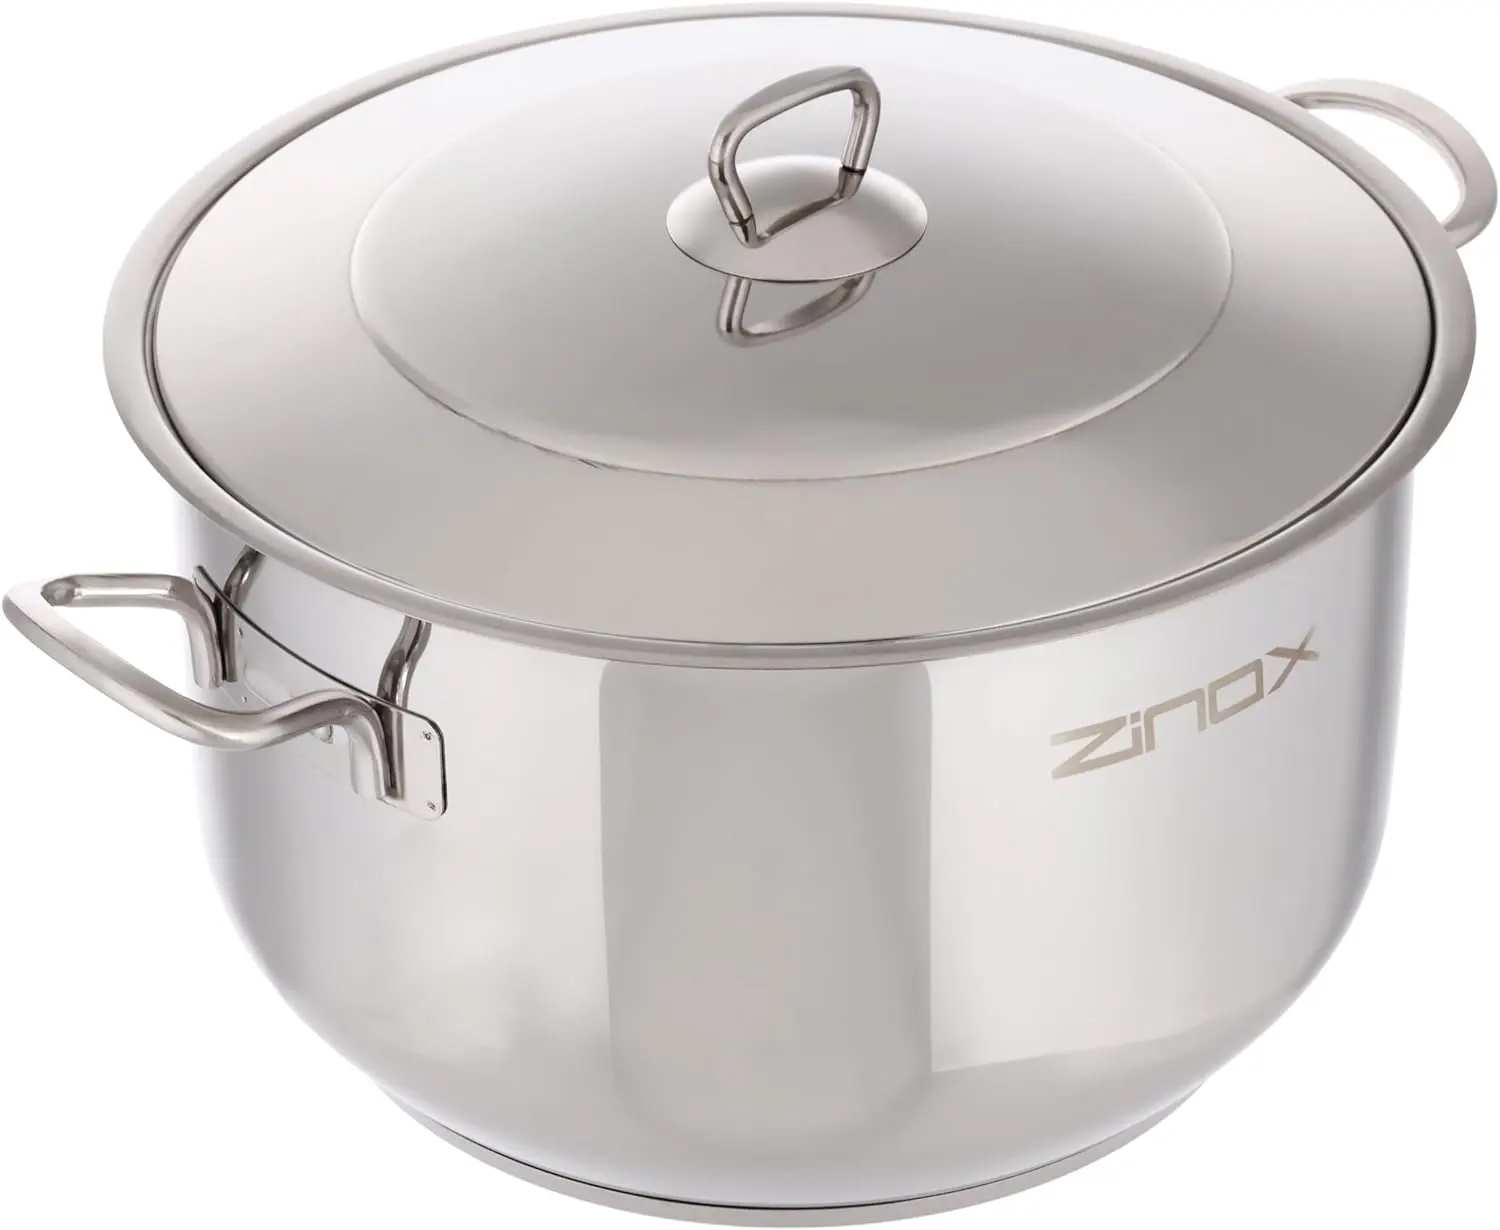 Zinox Classic stainless steel pot , size 36, silver